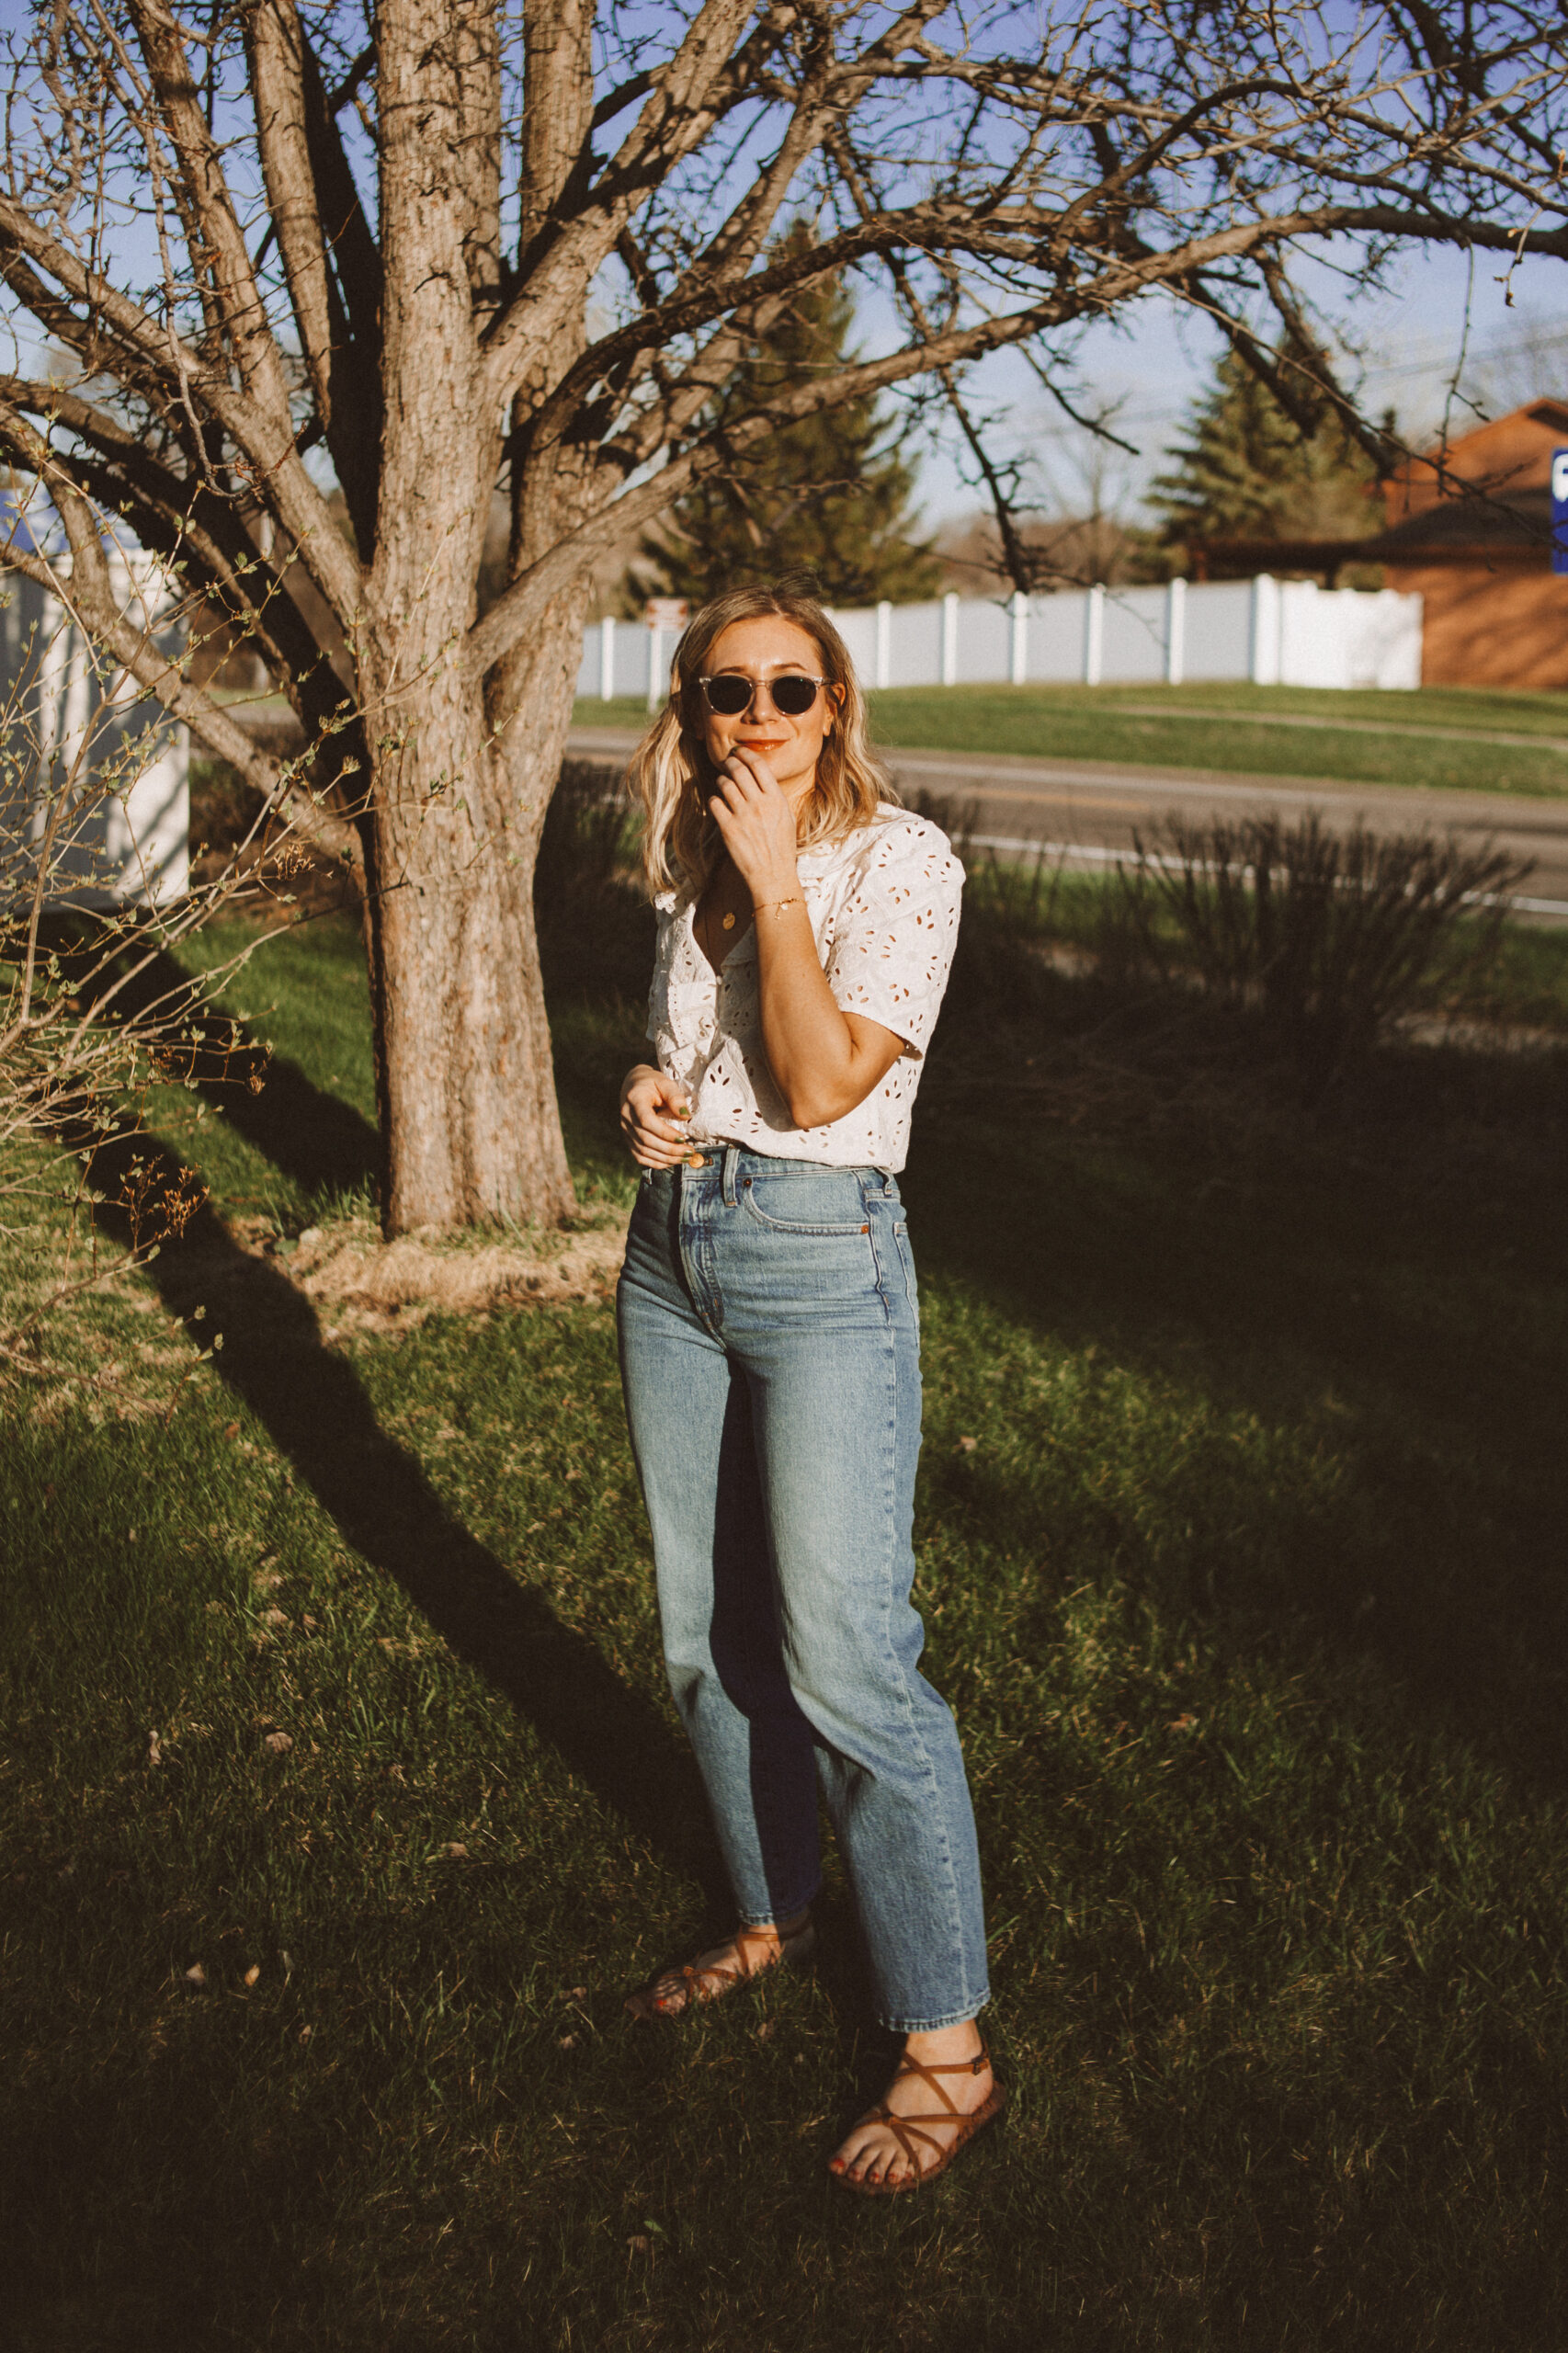 Karin Emily wears a white sezane top, wide leg Madewell jeans, and minimal ethically made sandals